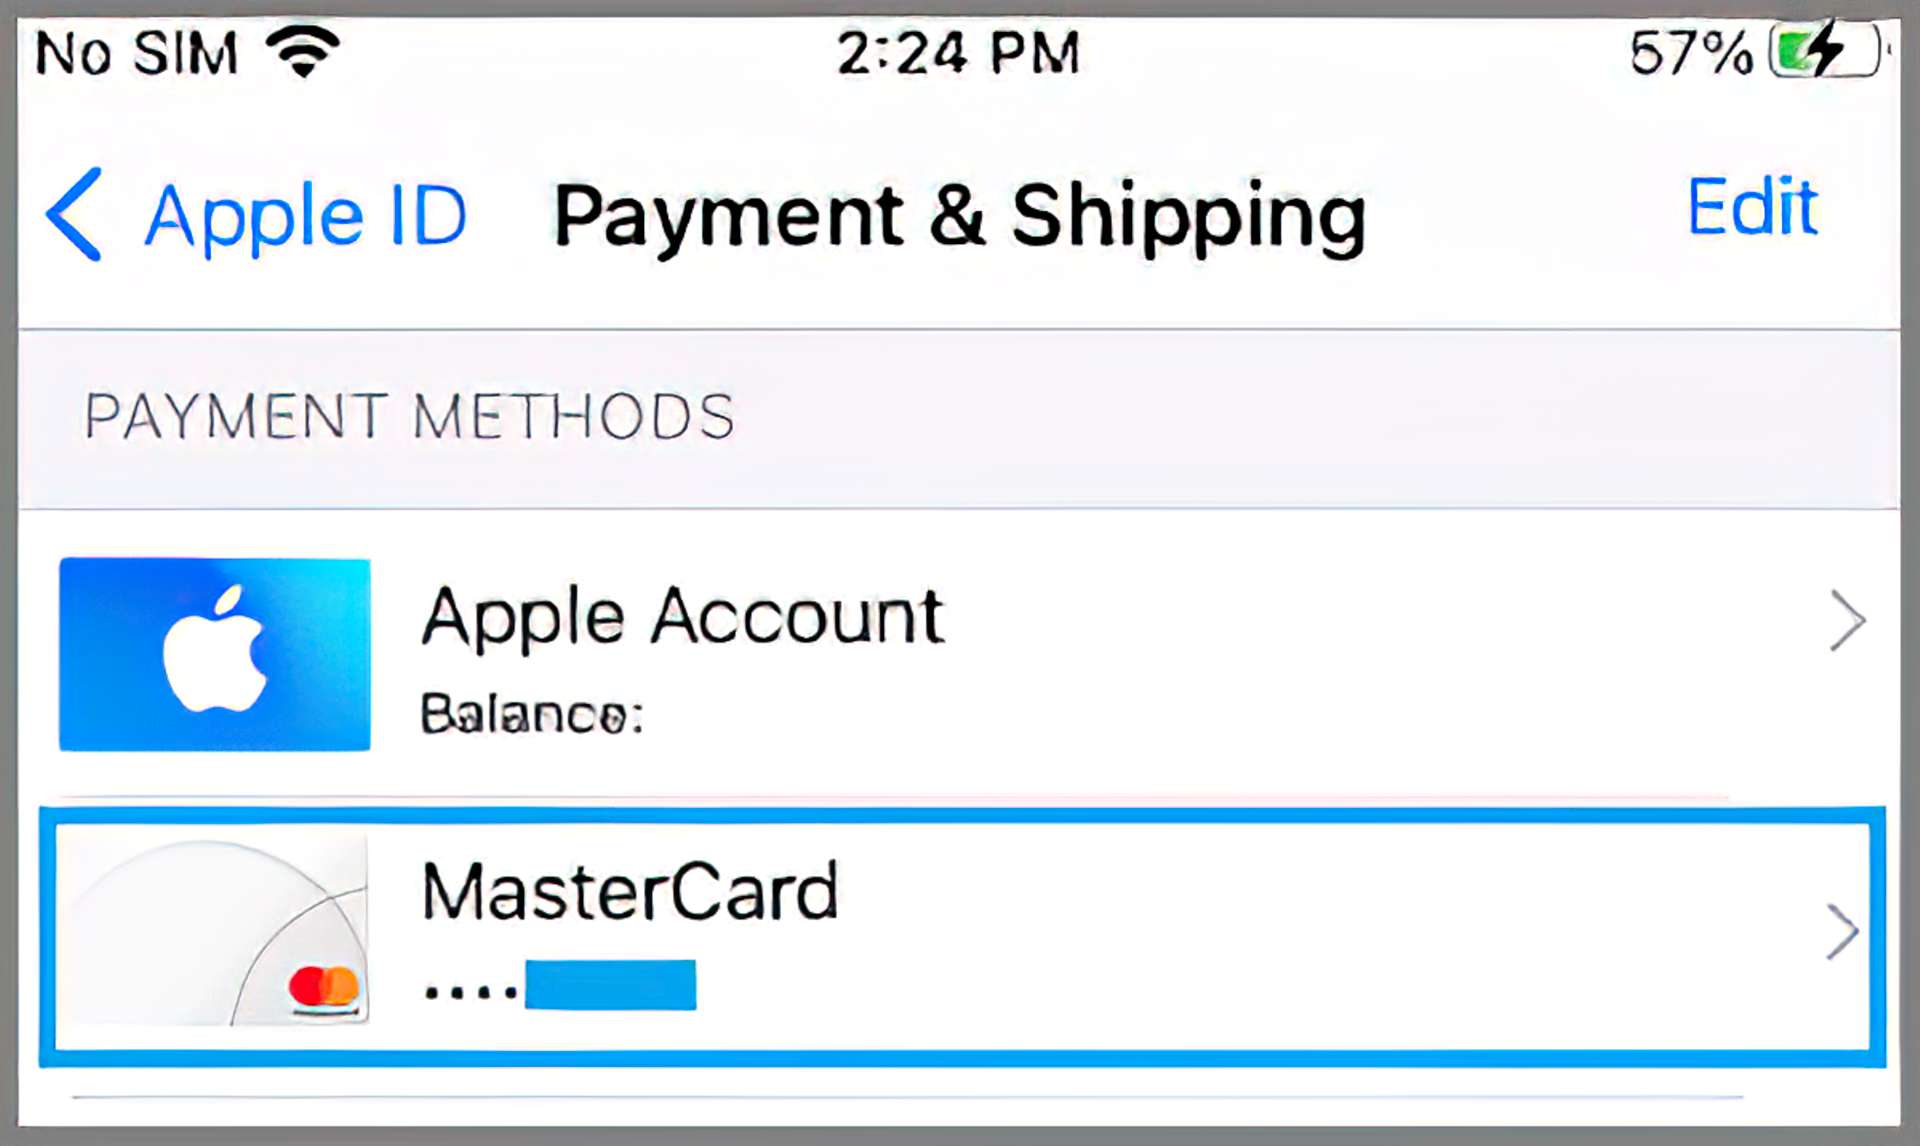 You will find below the steps to remove payment info on iPhone, iPad, Mac, Windows as well as other devices like Apple TV and Google Chromebook.